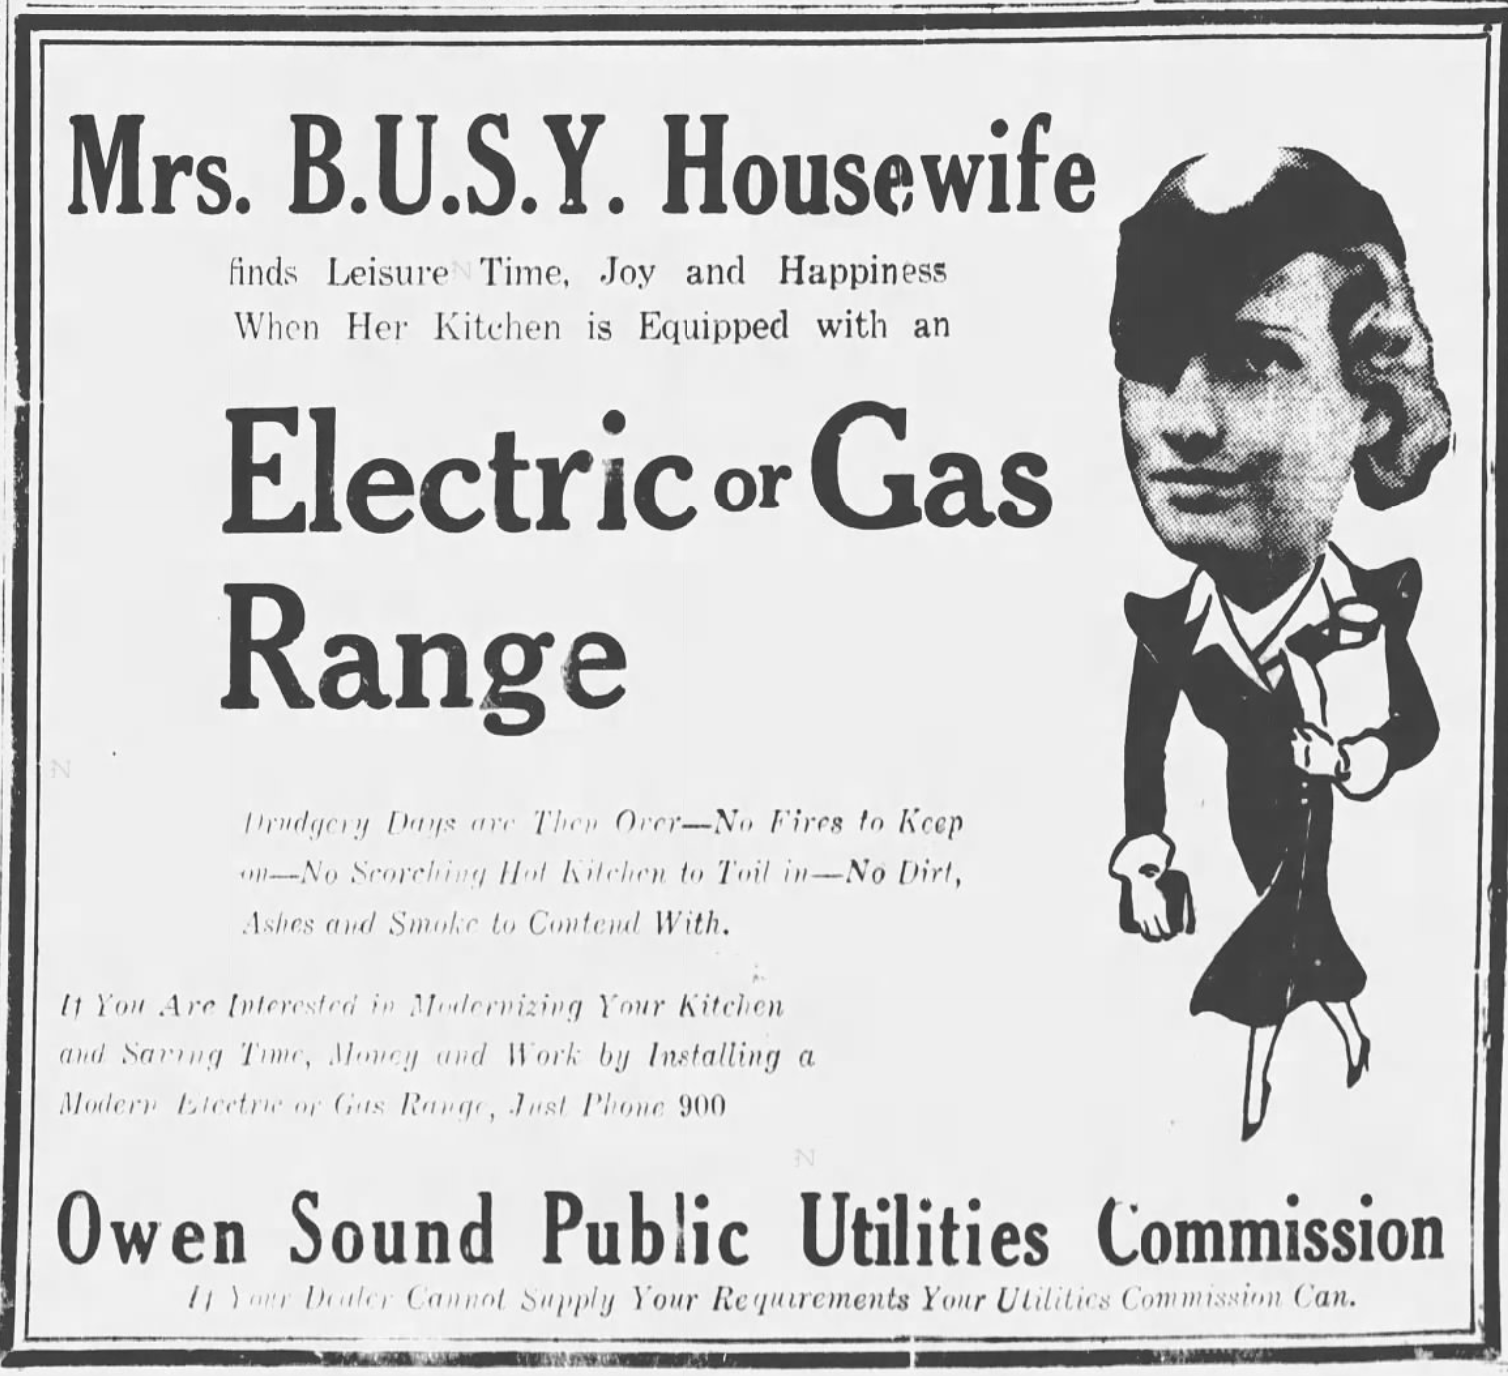 Mrs. B.U.S.Y. Housewife, illustrated by a businesslike-looking cartoon lady, "finds Leisure Time, Joy and Happiness When Her Kitchen is Equipped with an Electric or Gas Range"